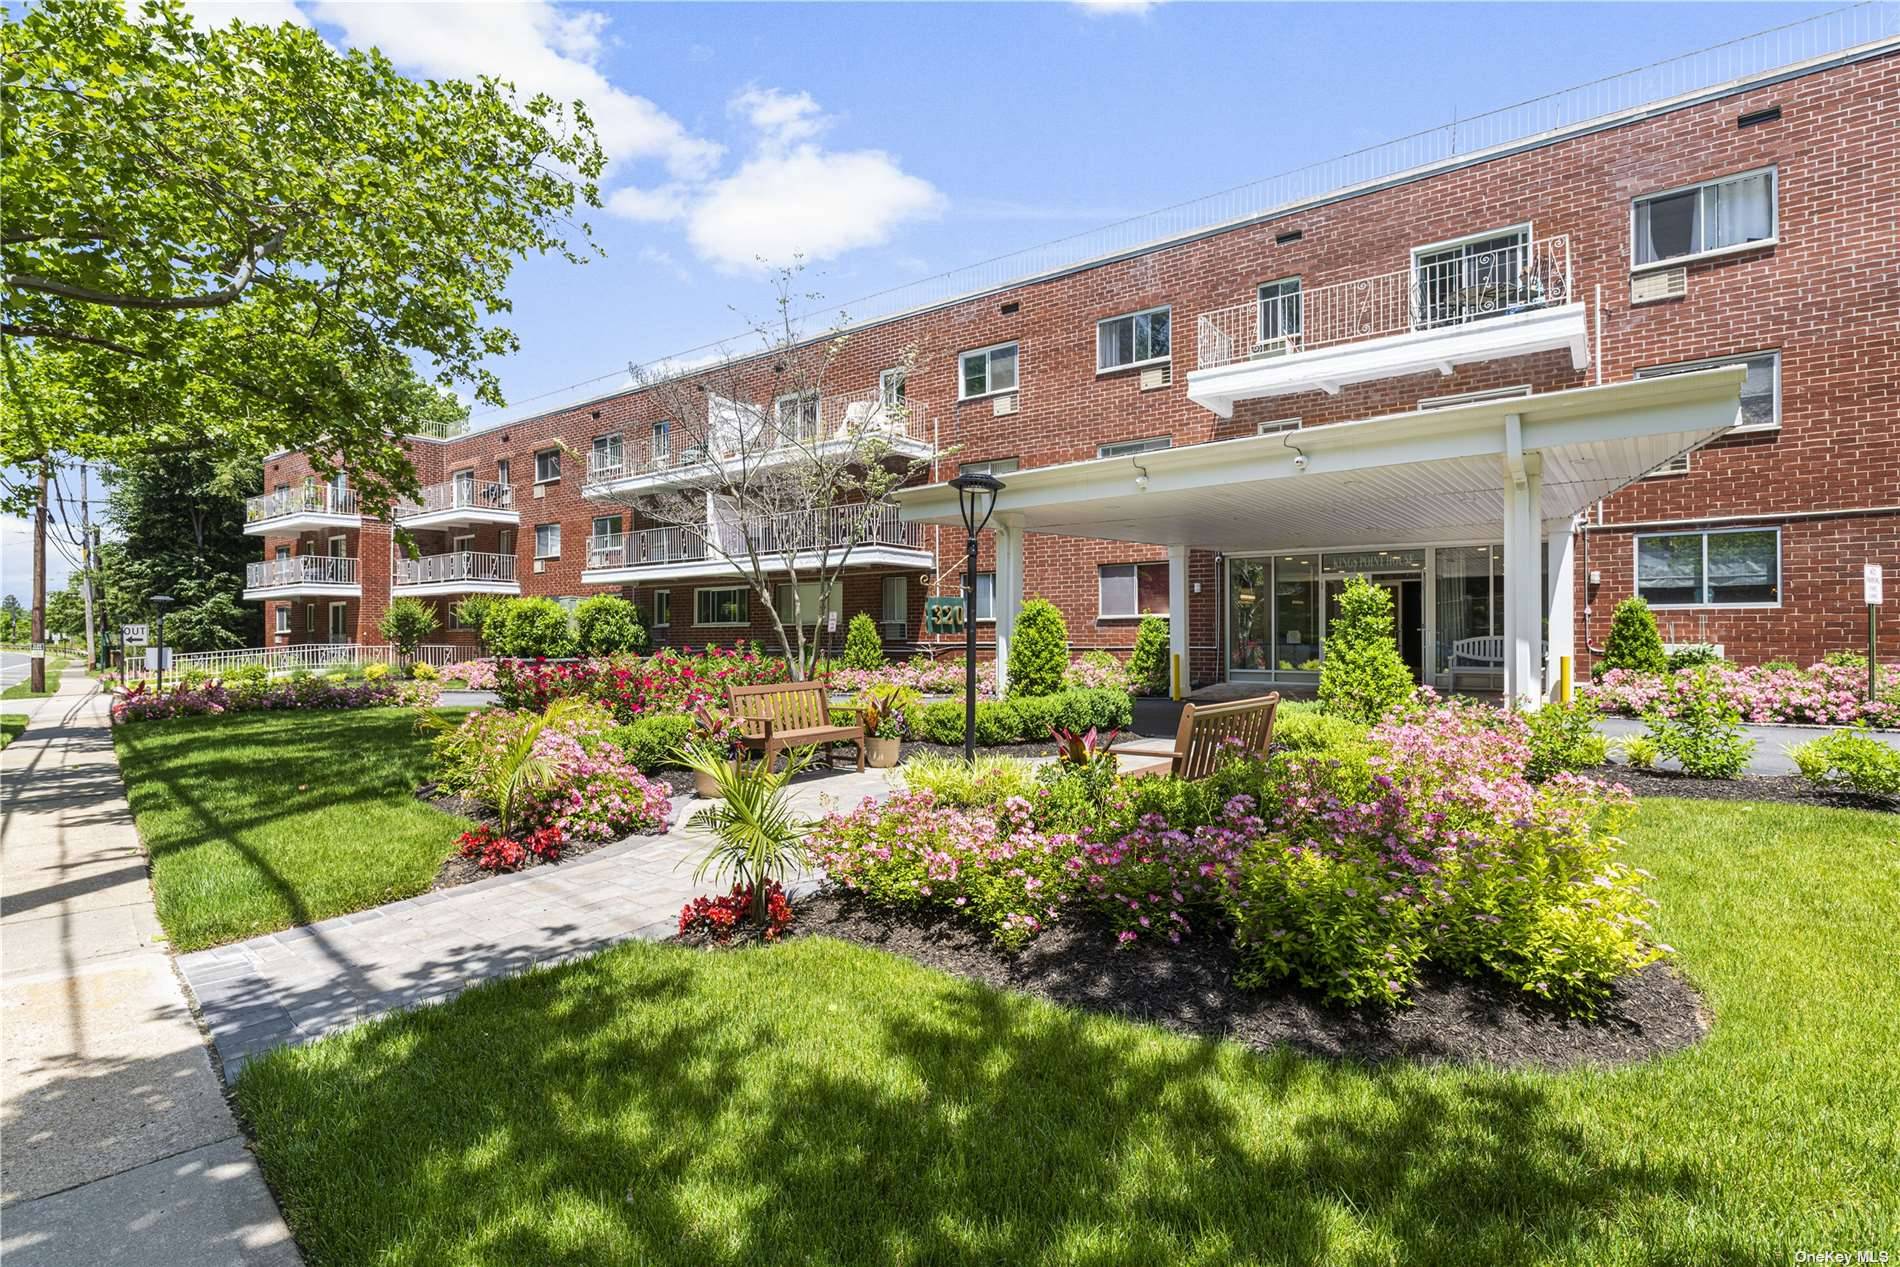 ESTATE SALE MOTIVATED SELLER Large 2 Bedroom 2 Full Bath Coop in Great Necks most desirable waterfront co op building which sits on Manhasset Bay.